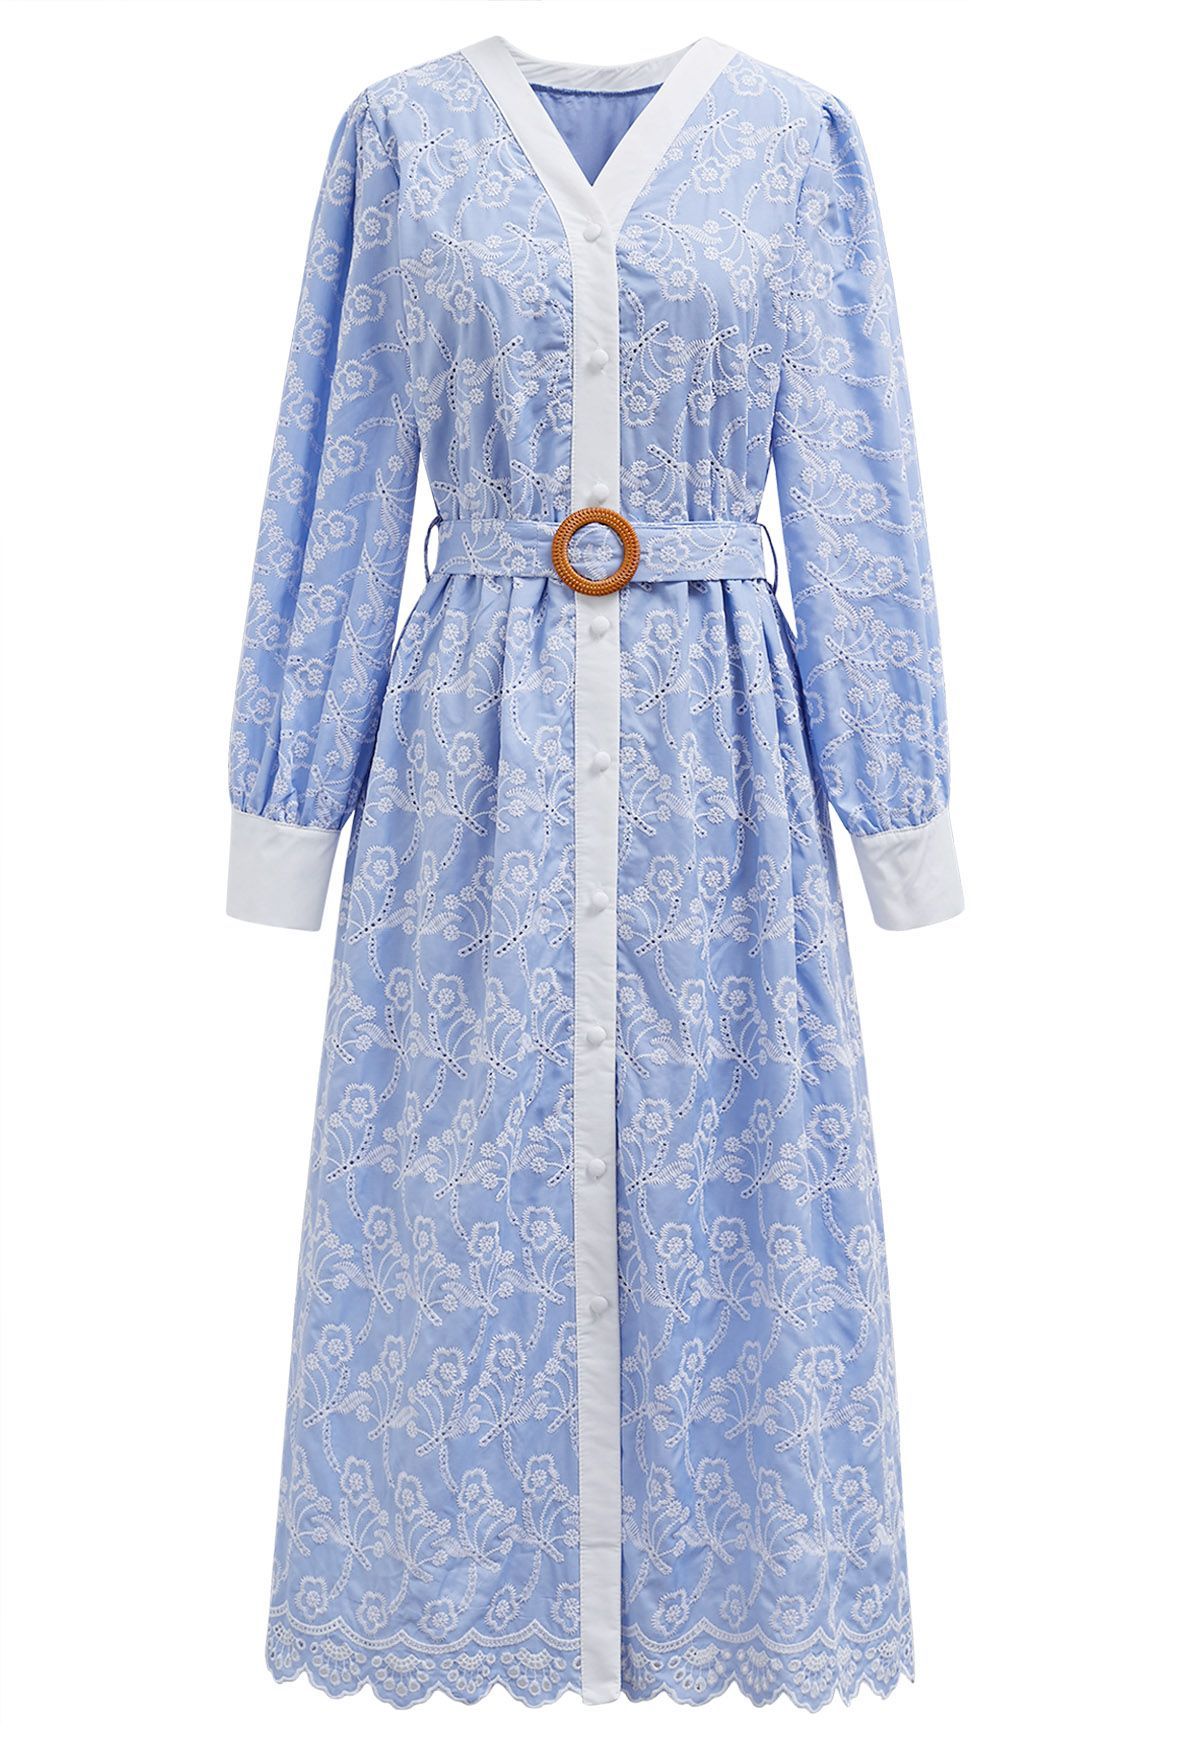 Dancing Floret Embroidered Button Down Dress in Baby Blue | Chicwish